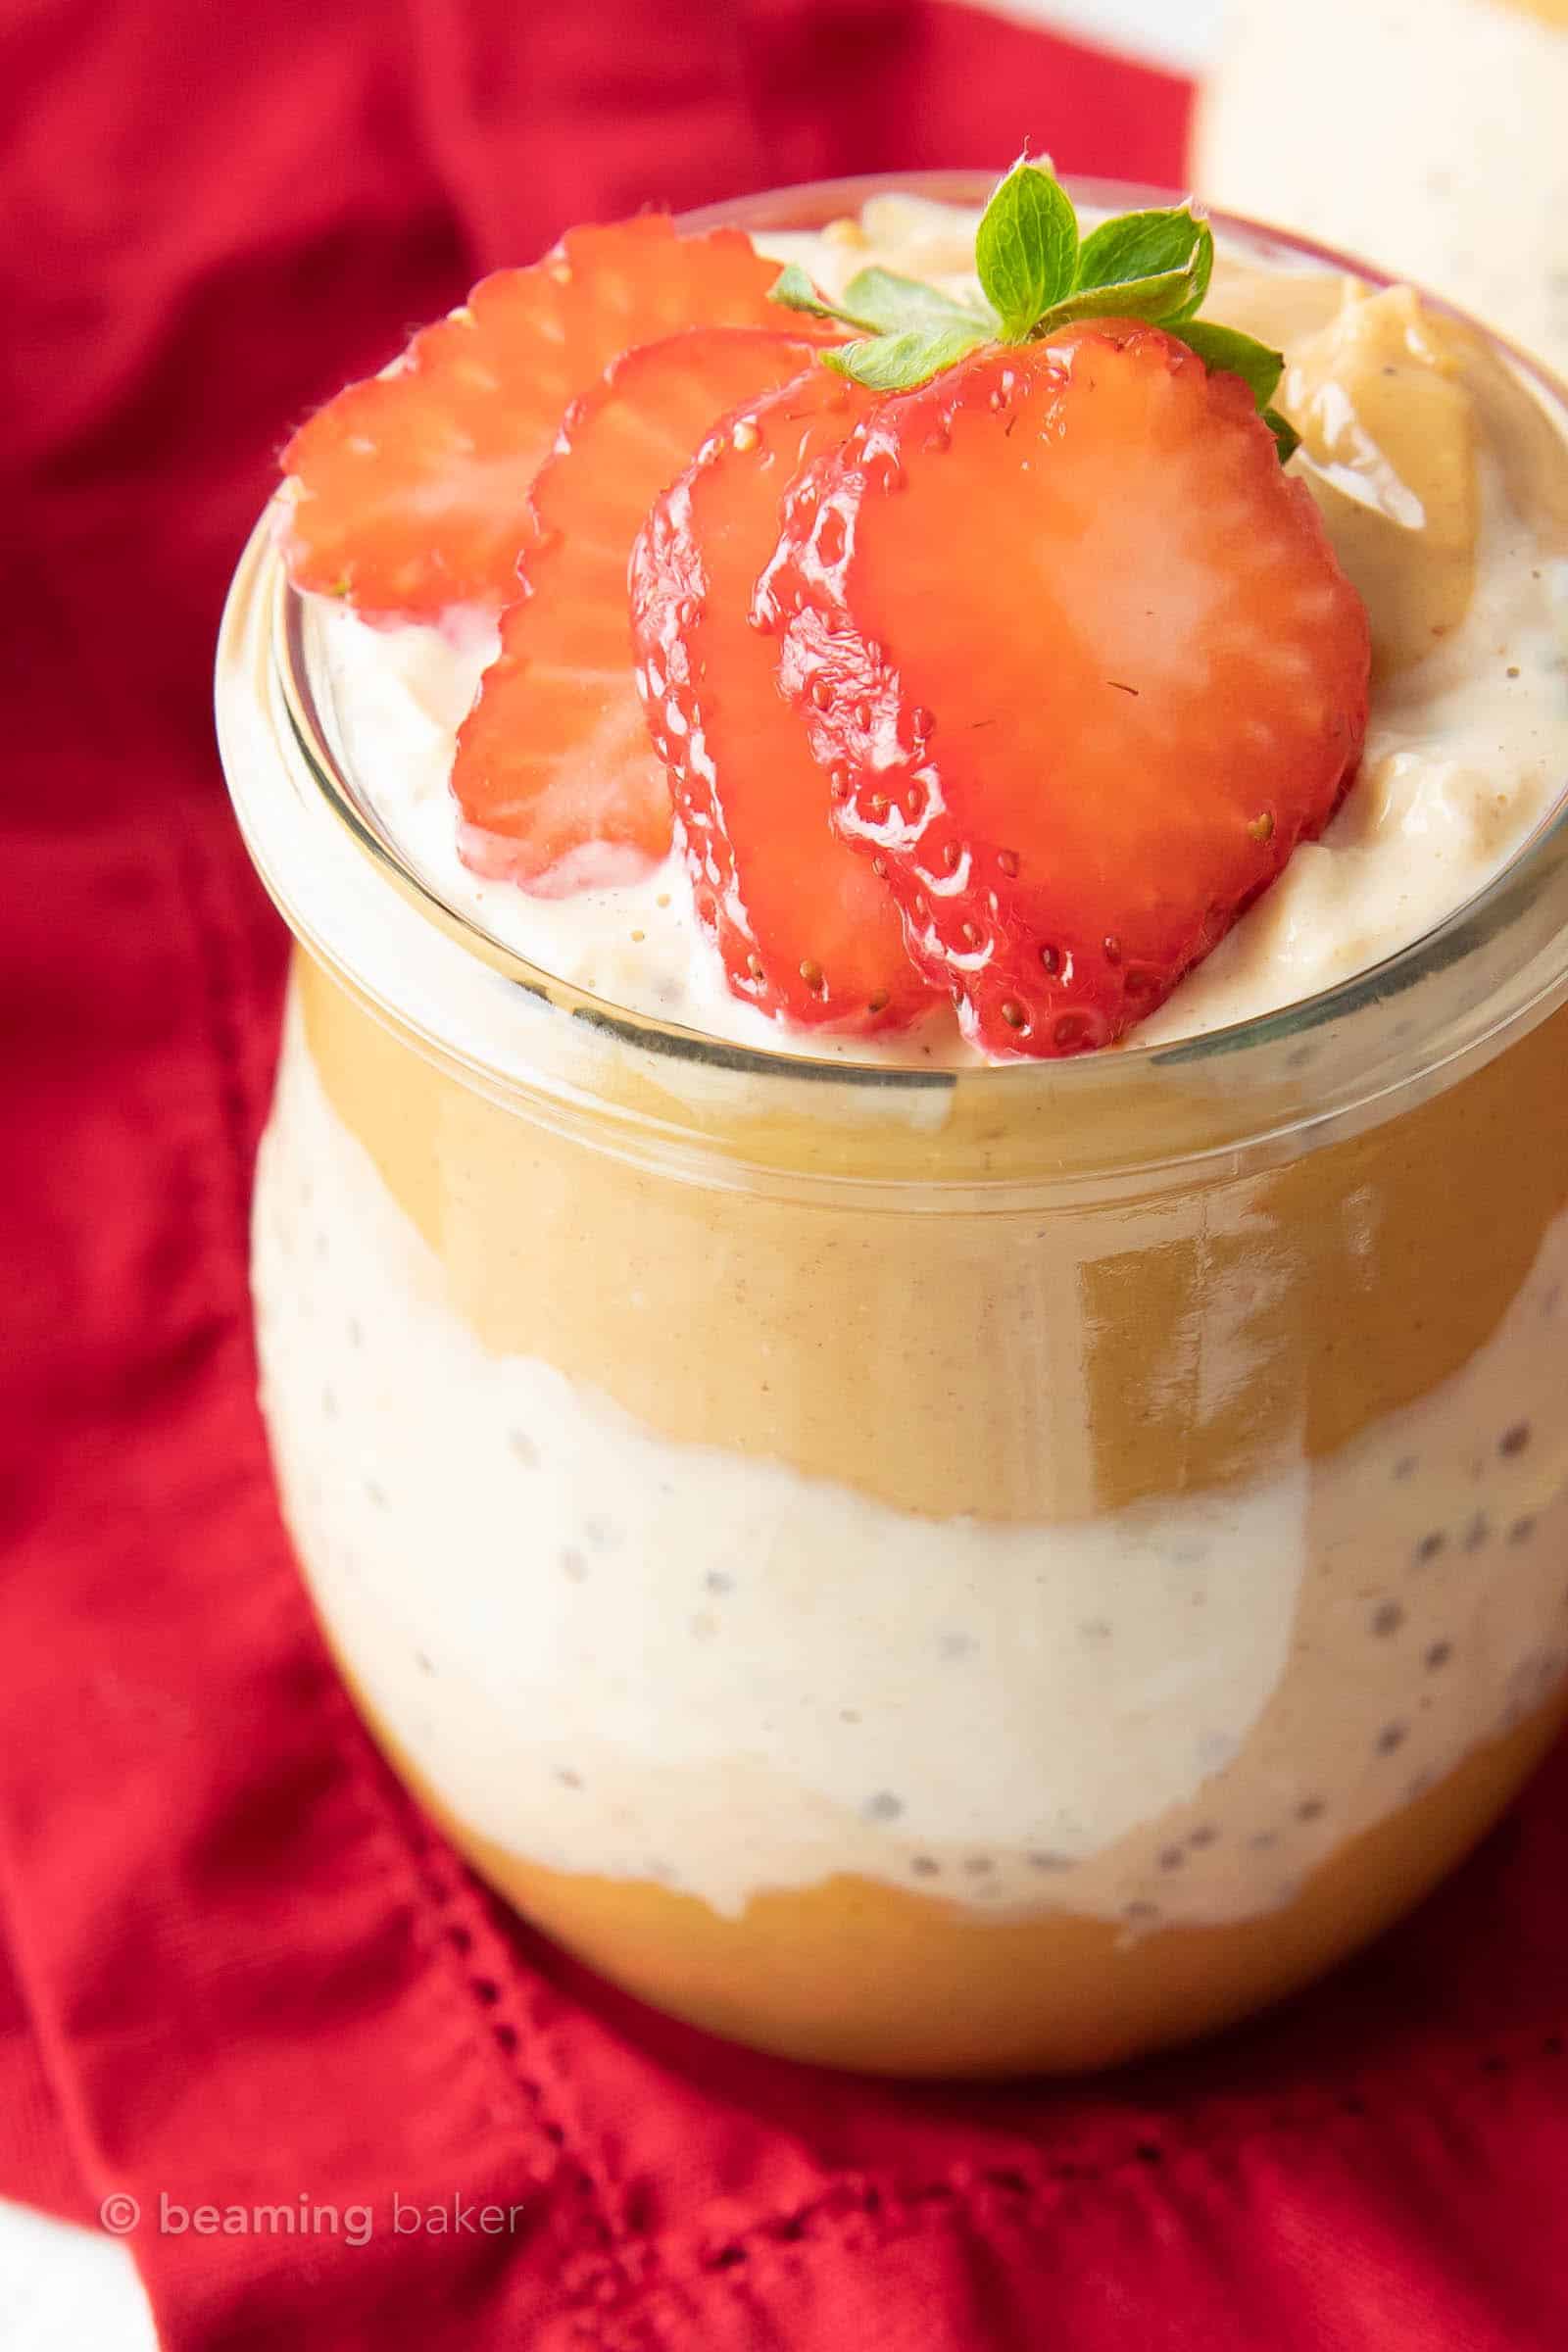 Fresh, sliced strawberries atop layers of peanut butter and overnight oats with peanut butter